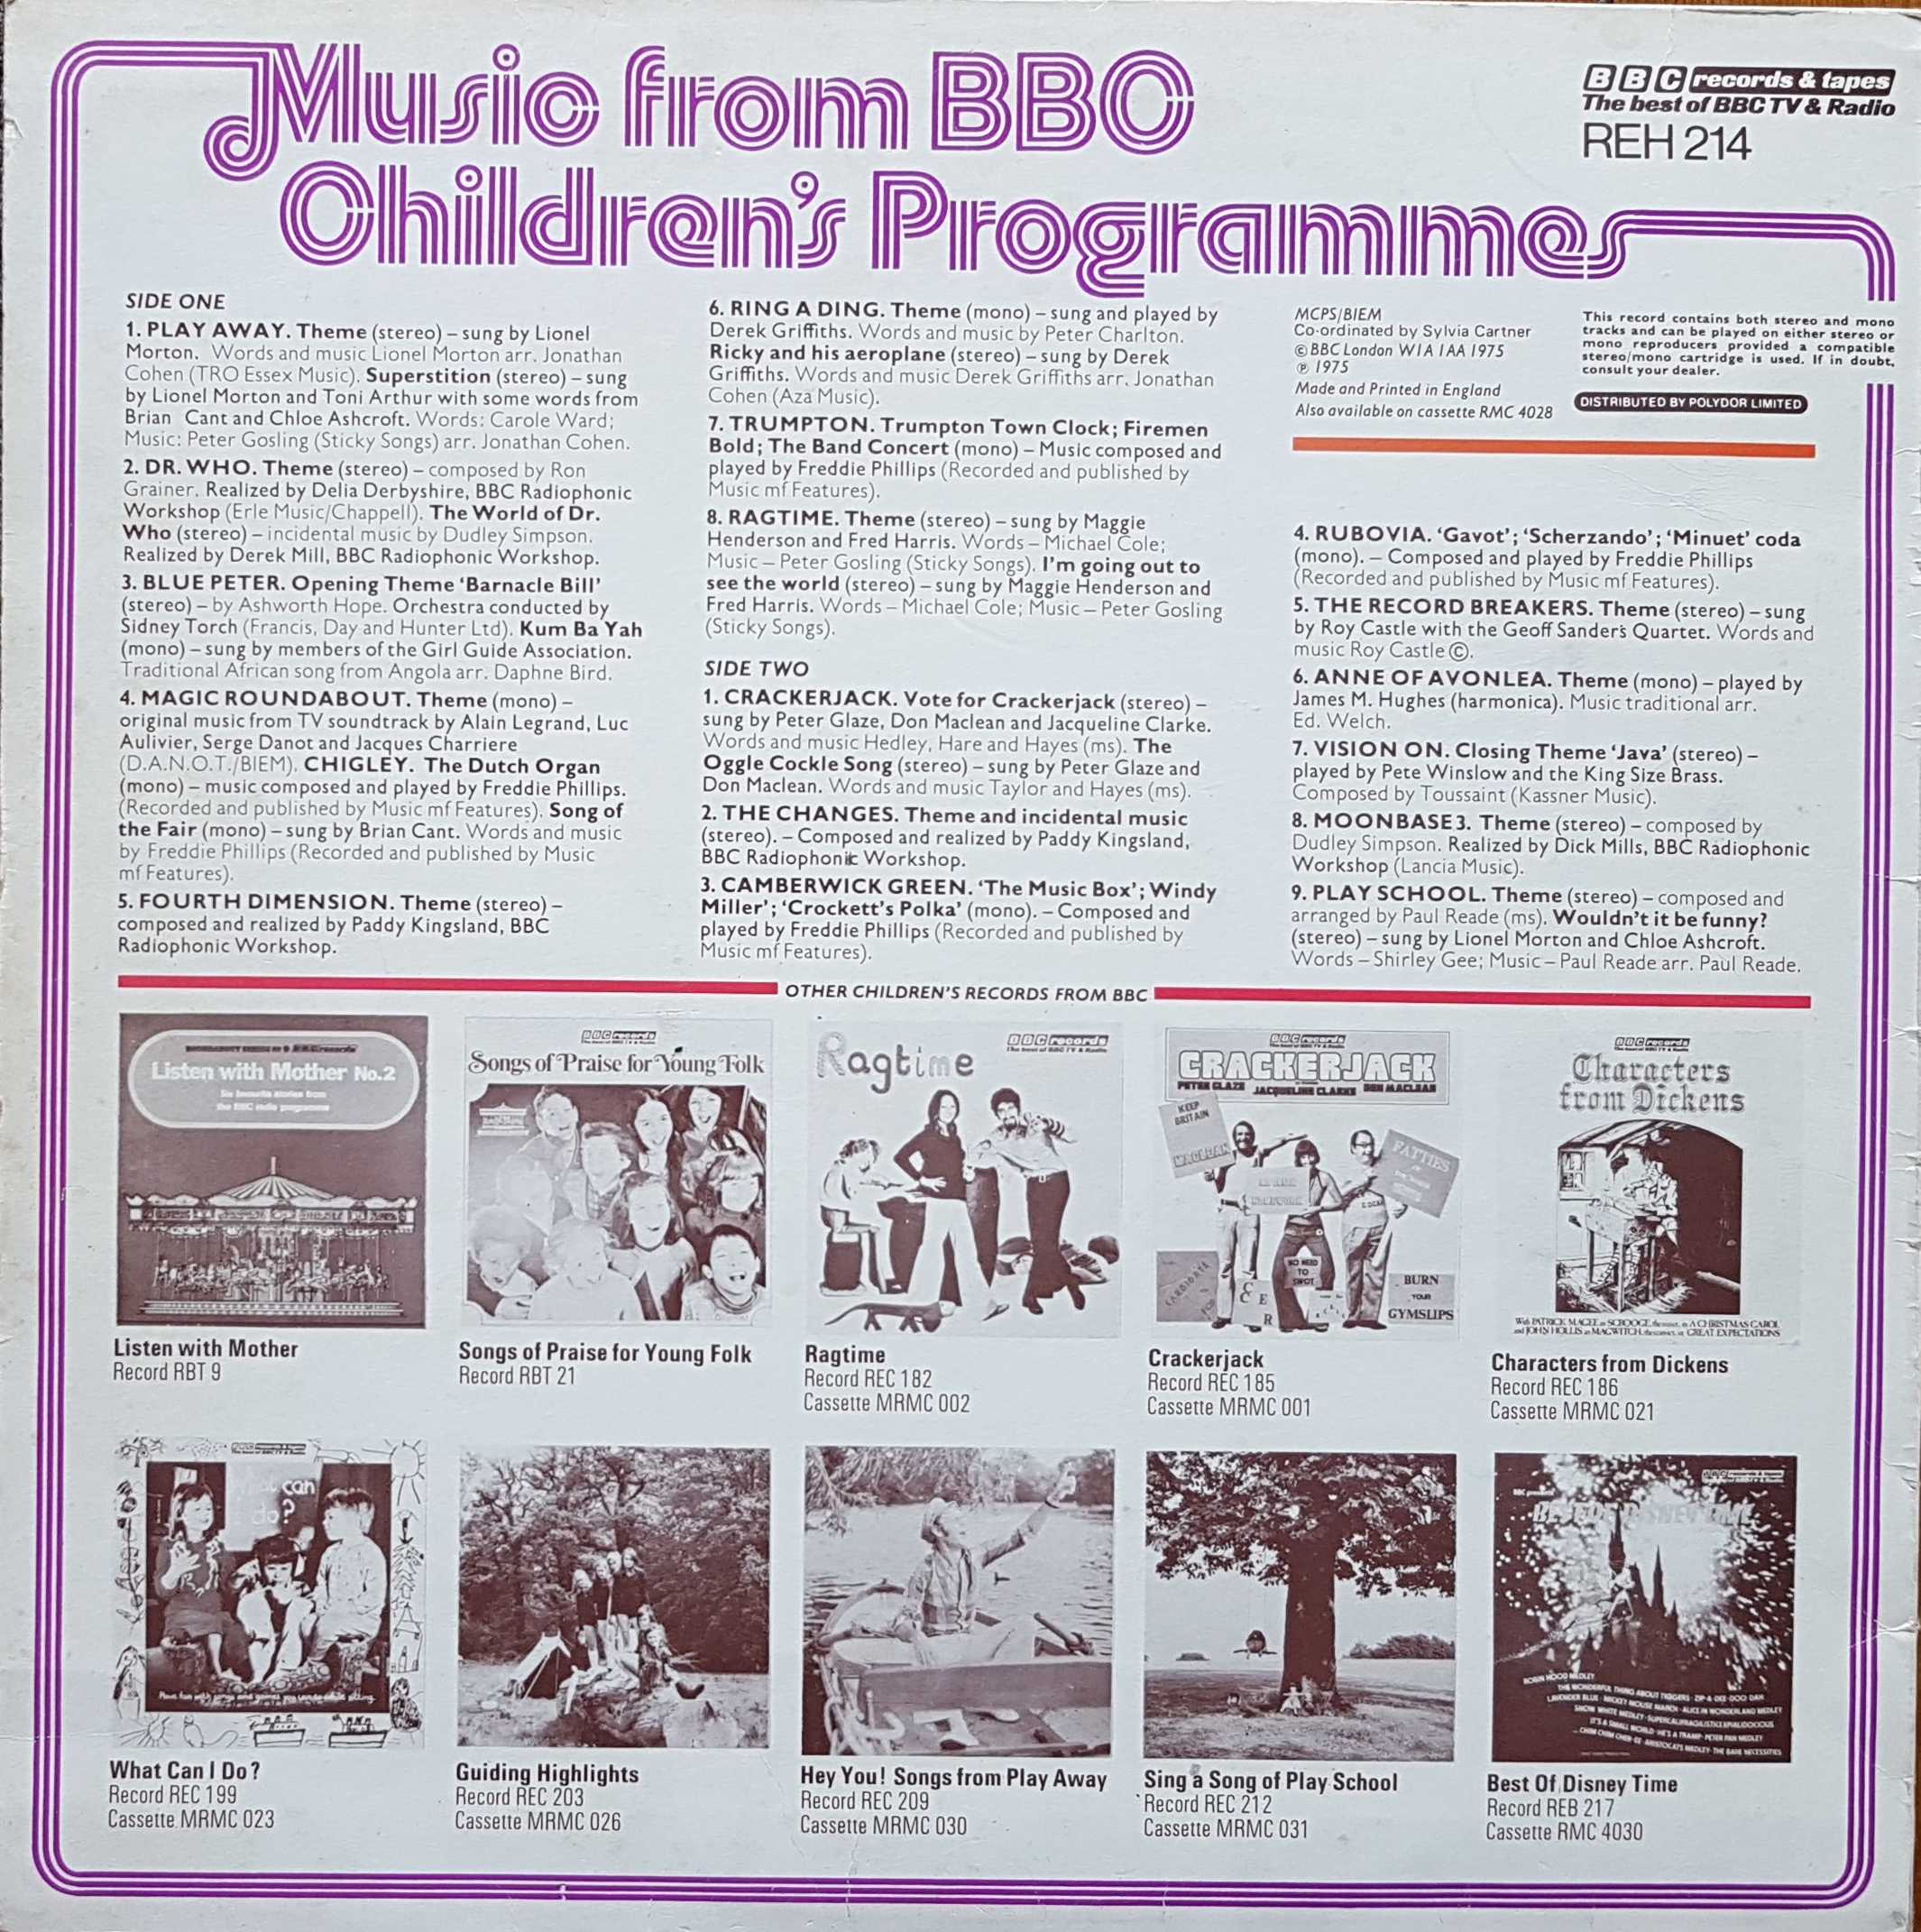 Picture of REH 214 Music from BBC Childrens Programmes by artist Various from the BBC records and Tapes library